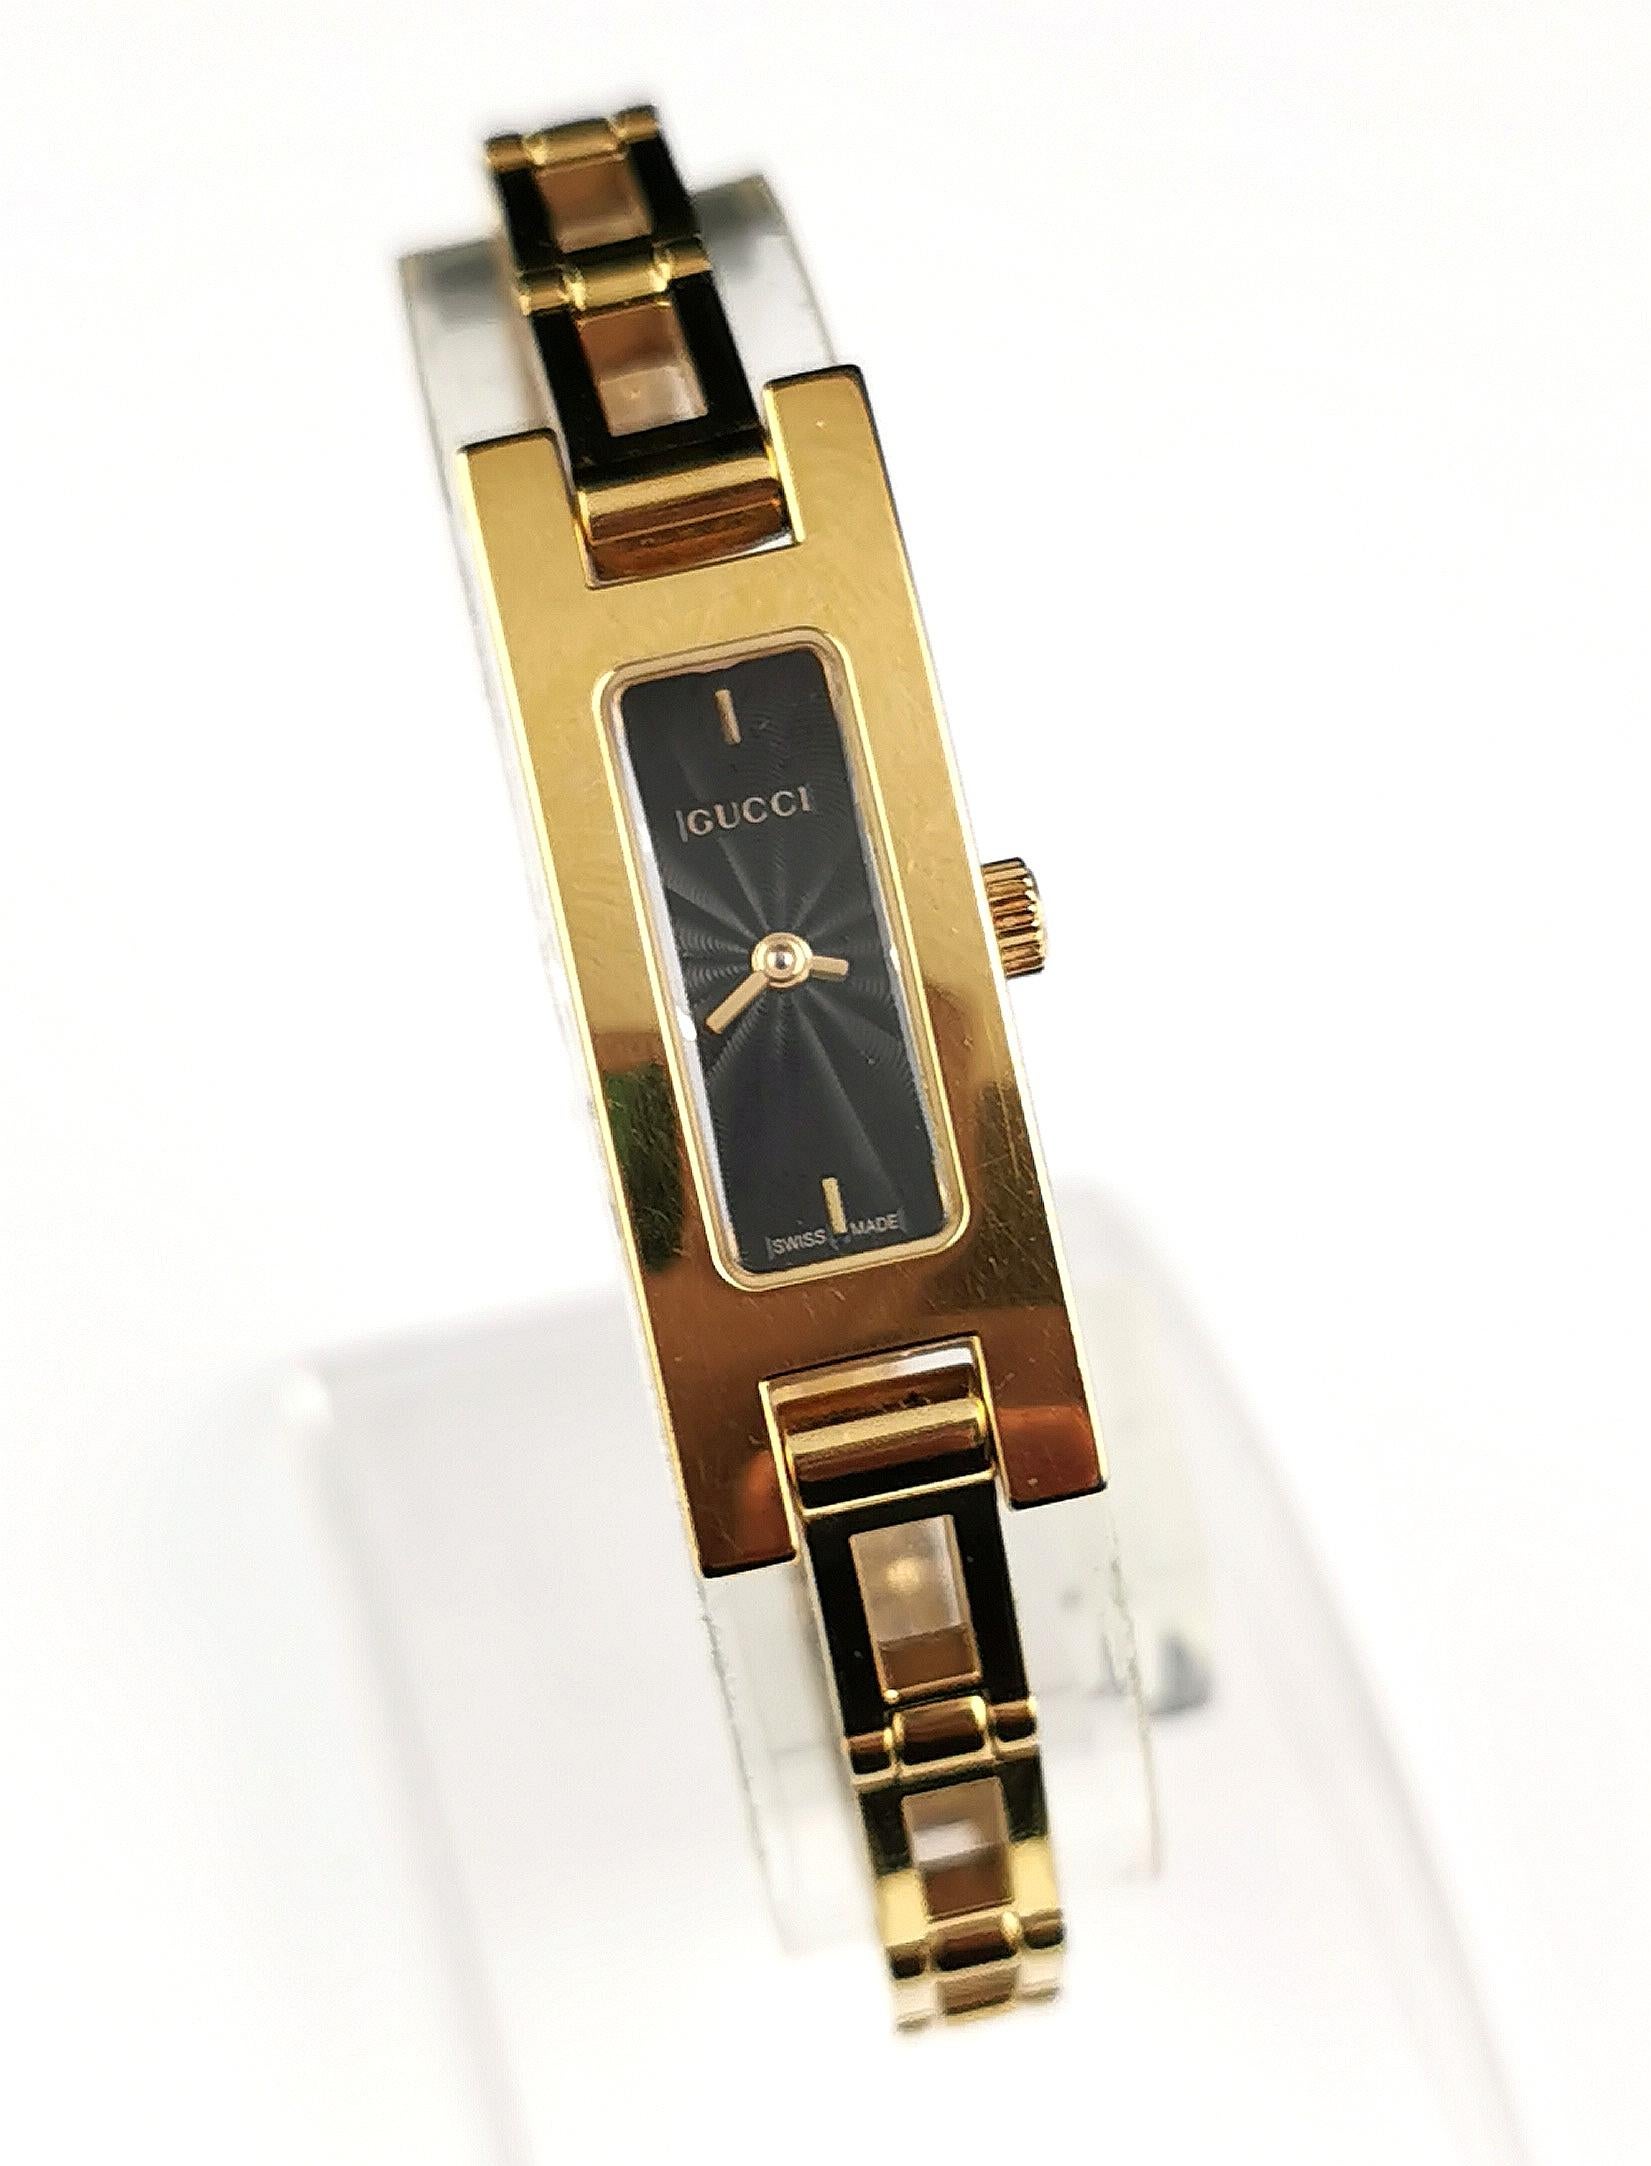 Vintage Gucci 3900l ladies wristwatch, gold plated, boxed  3